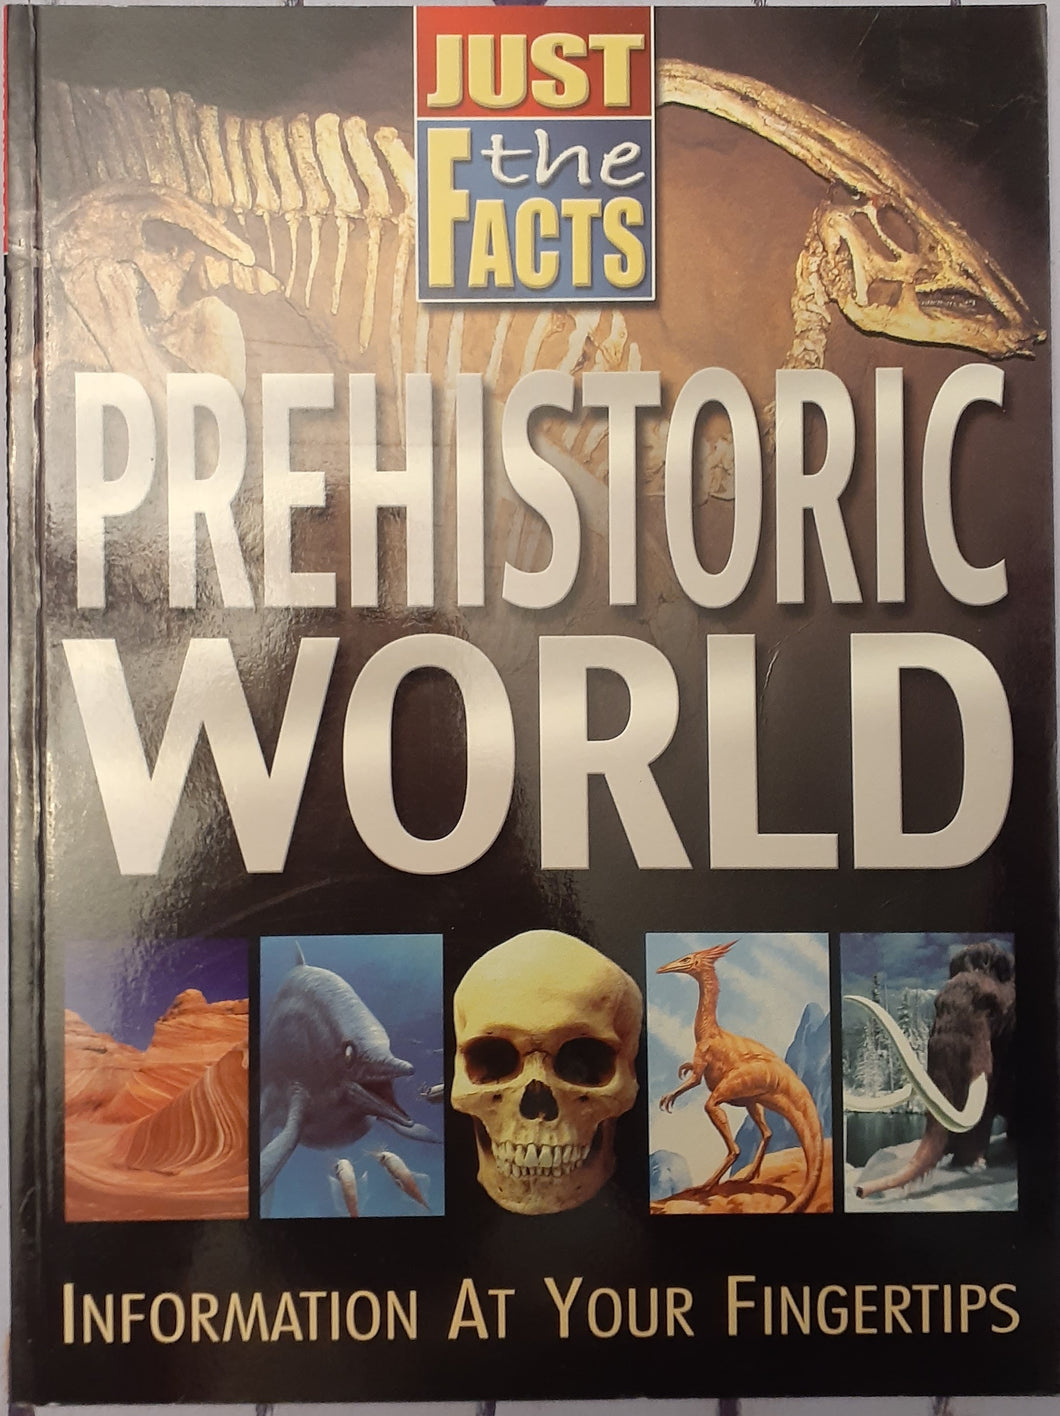 Just the Facts - Prehistoric World